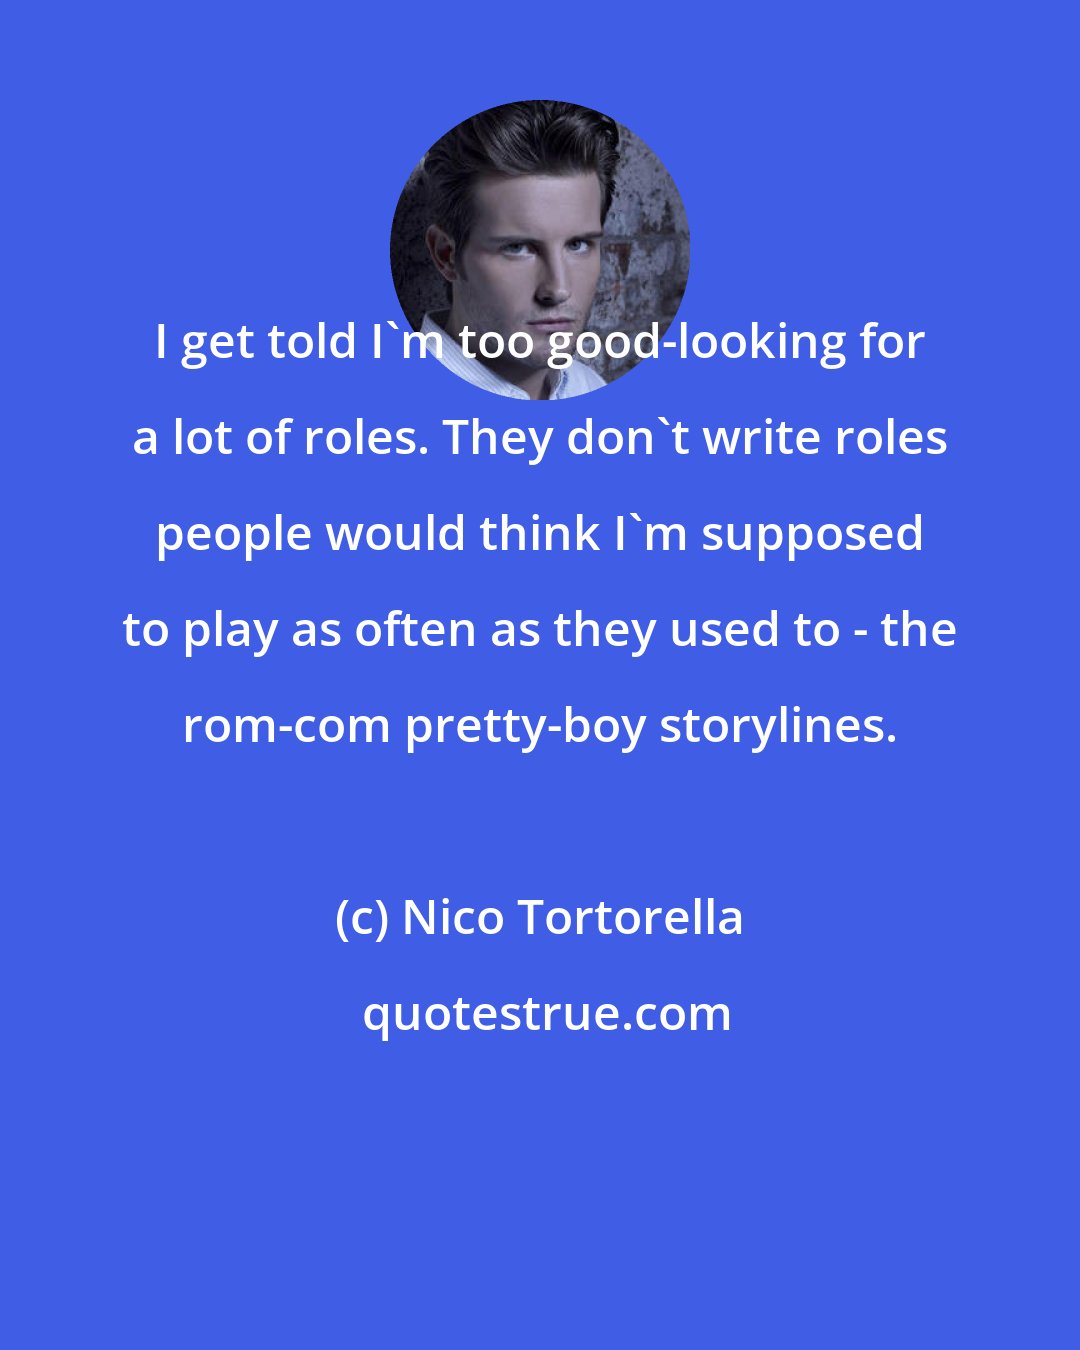 Nico Tortorella: I get told I'm too good-looking for a lot of roles. They don't write roles people would think I'm supposed to play as often as they used to - the rom-com pretty-boy storylines.